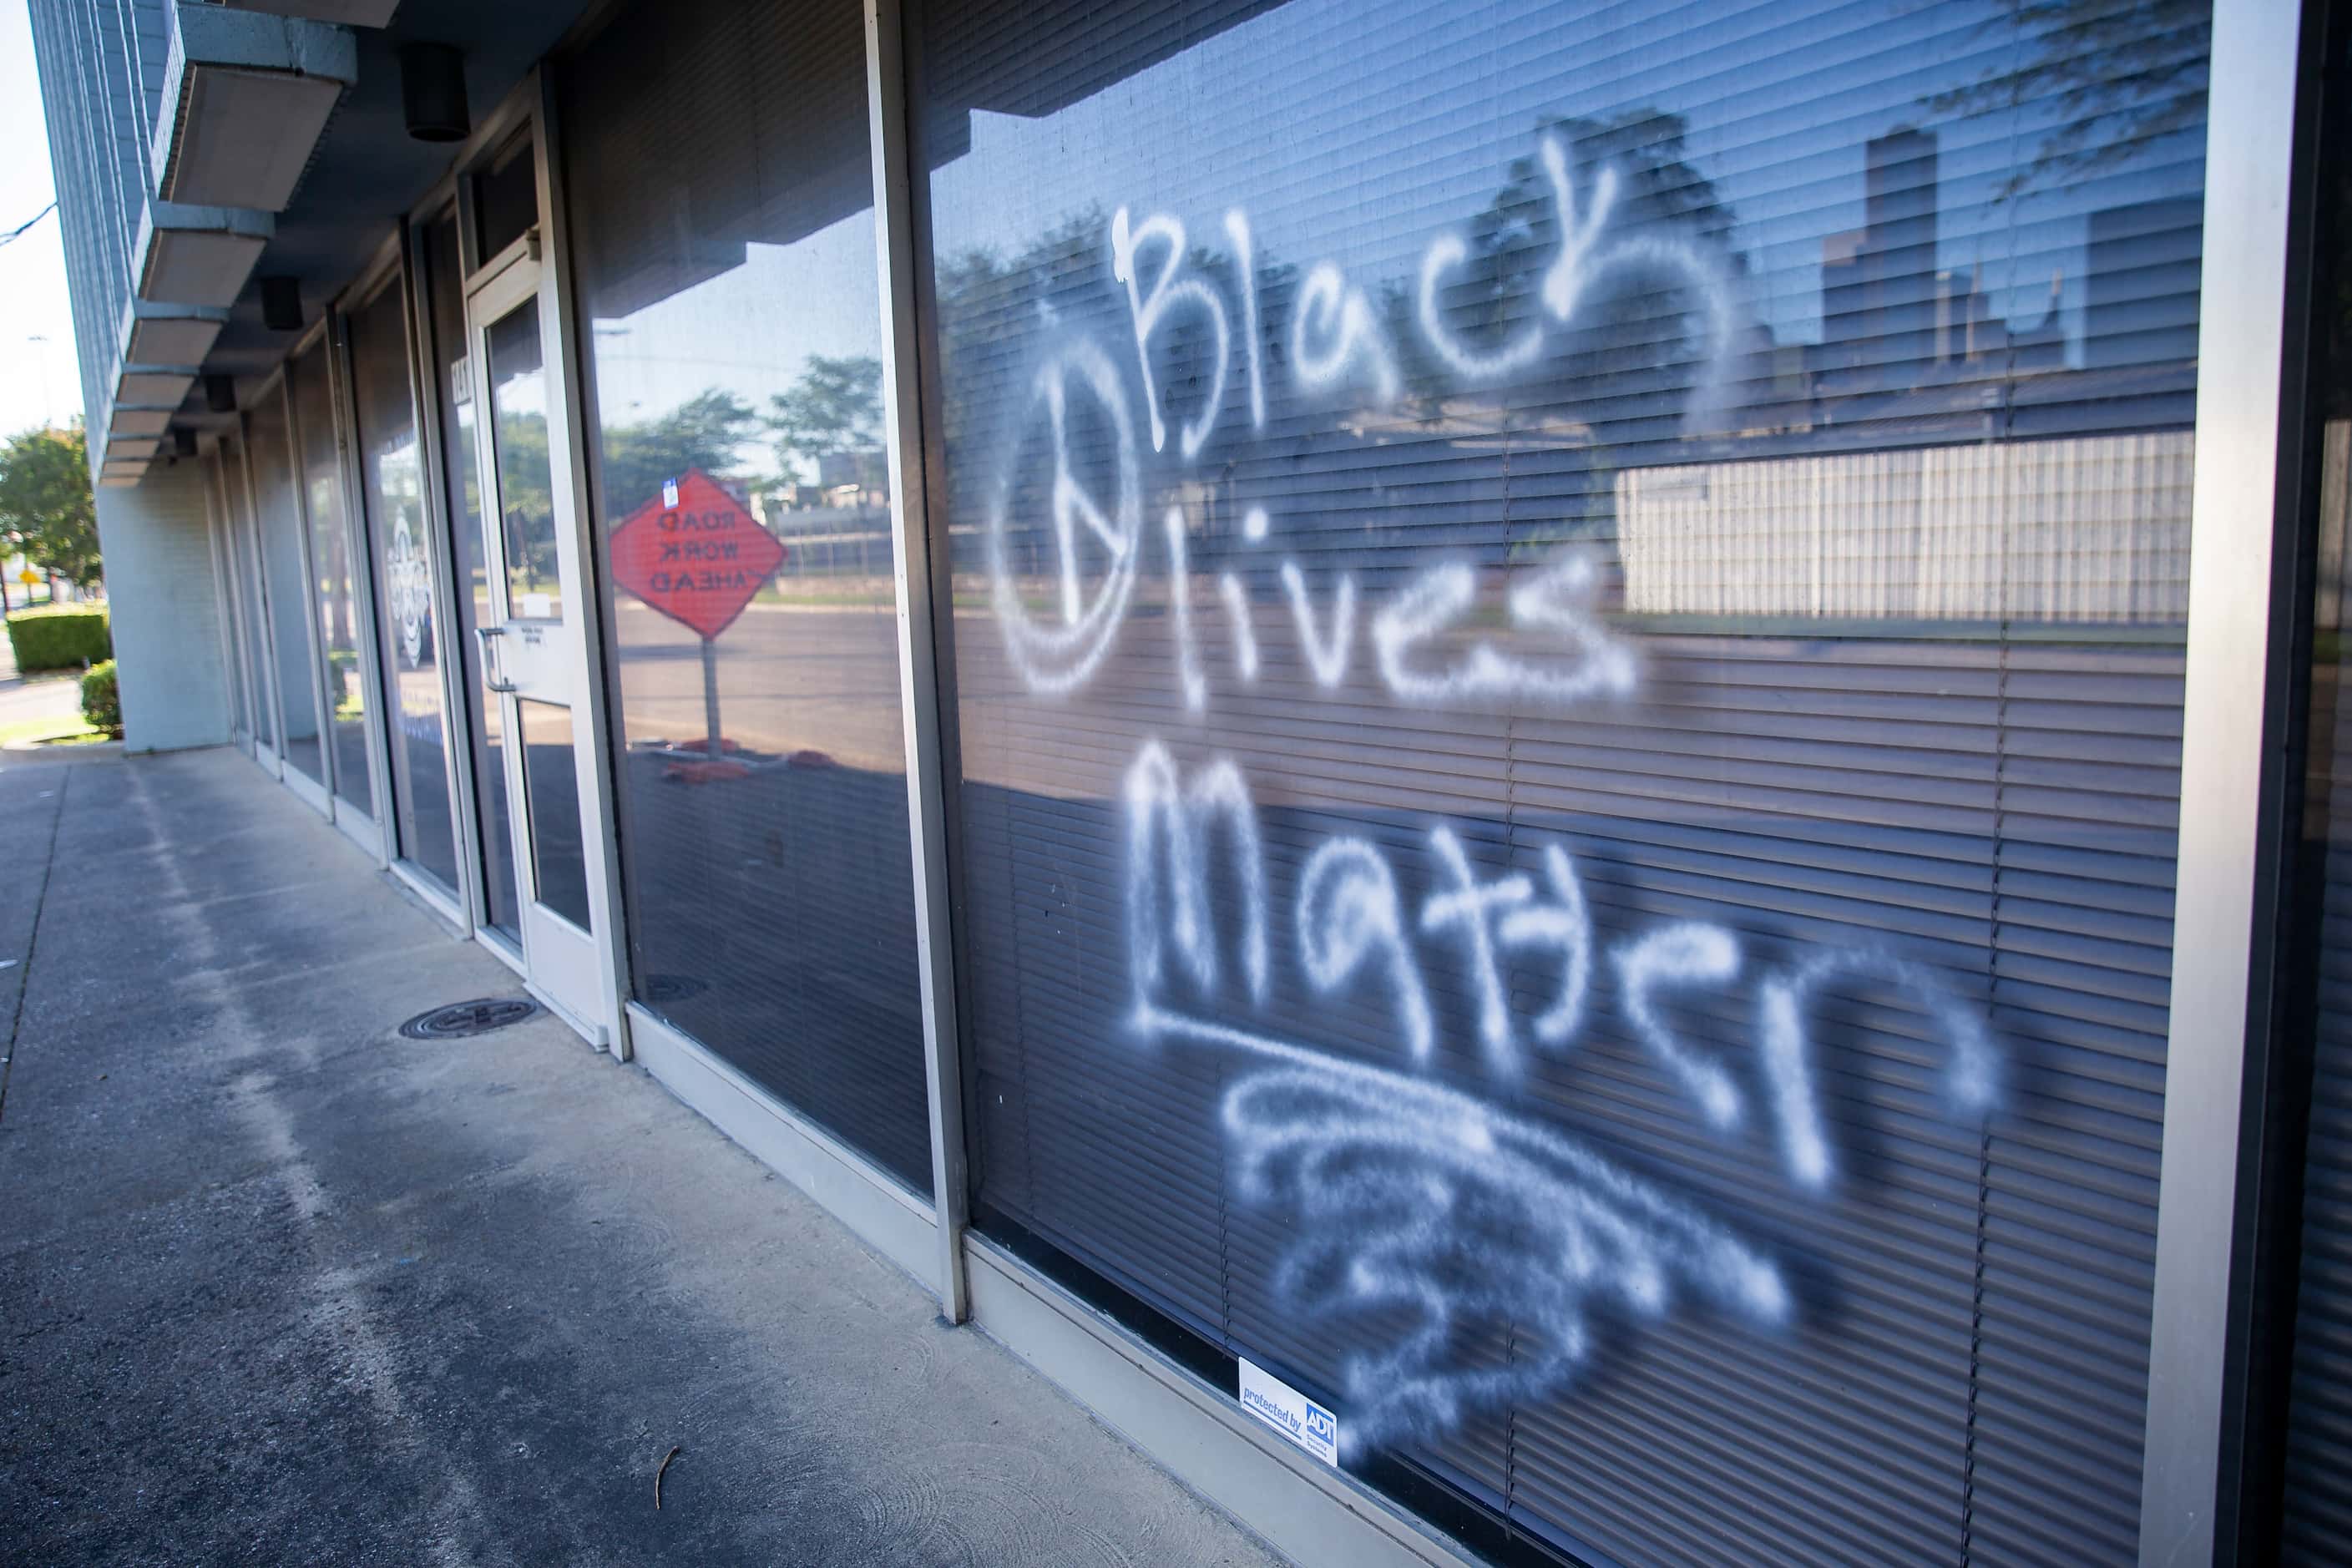 Graffiti left at the Dallas Police Association office during last night's protest, seen...